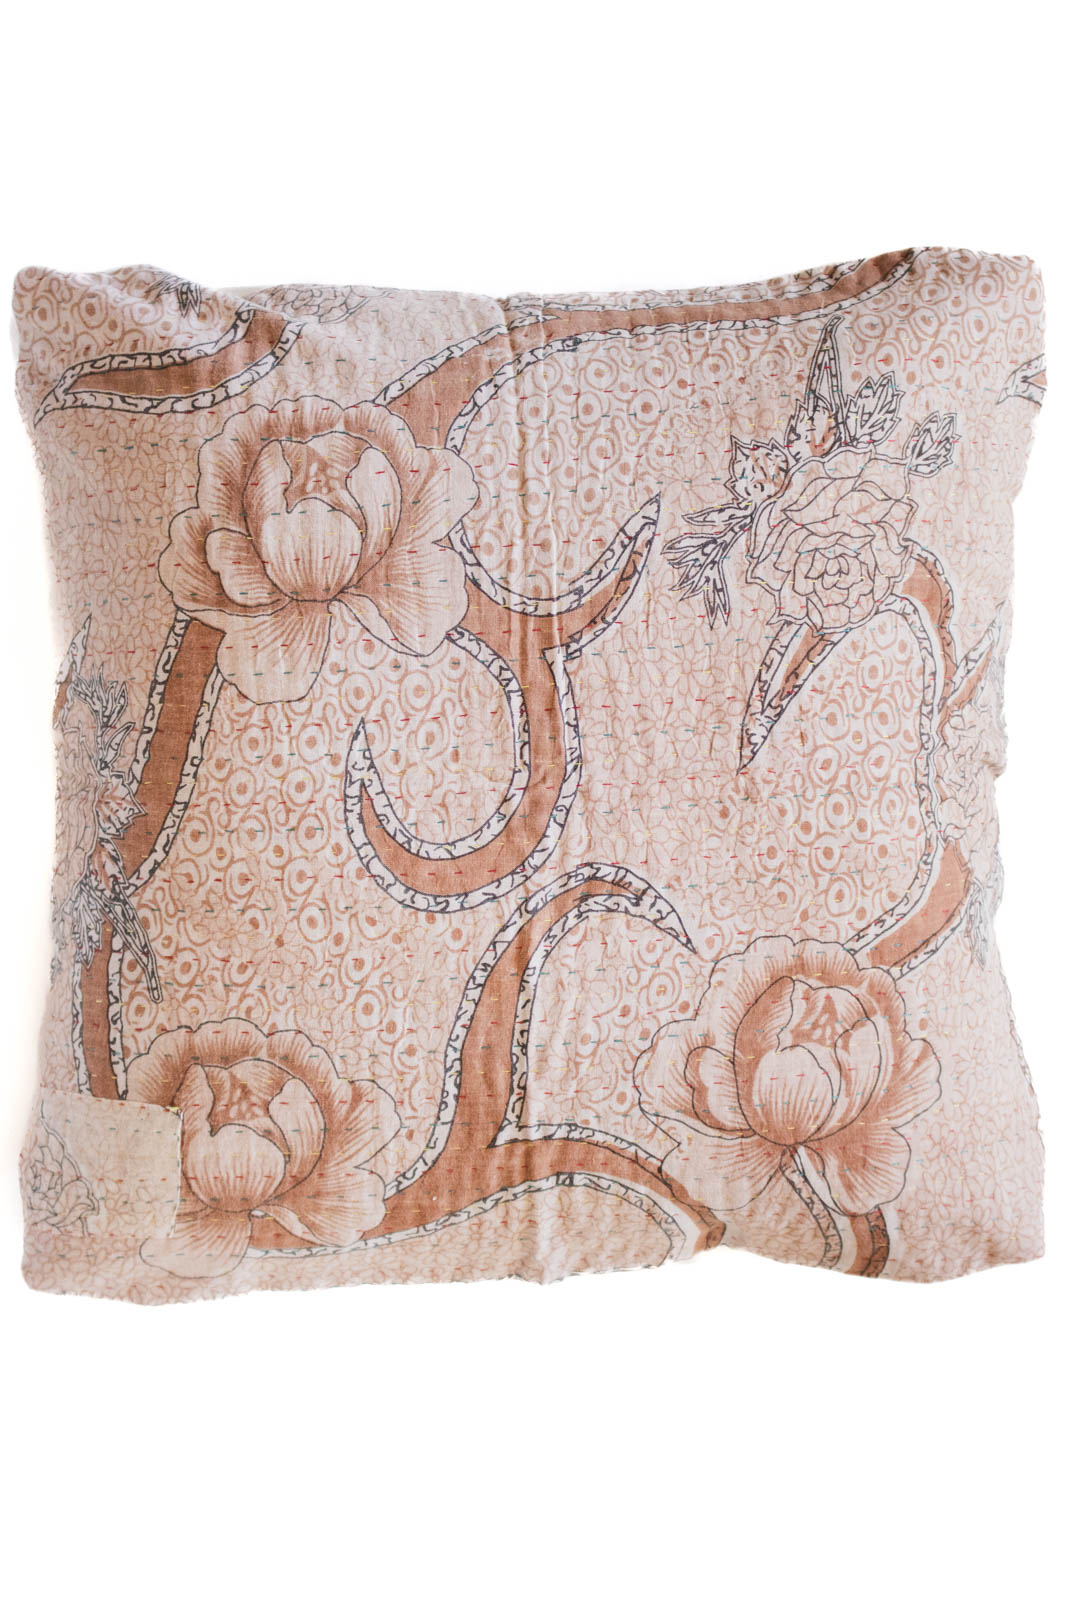 Restore no. 6 Kantha Pillow Cover